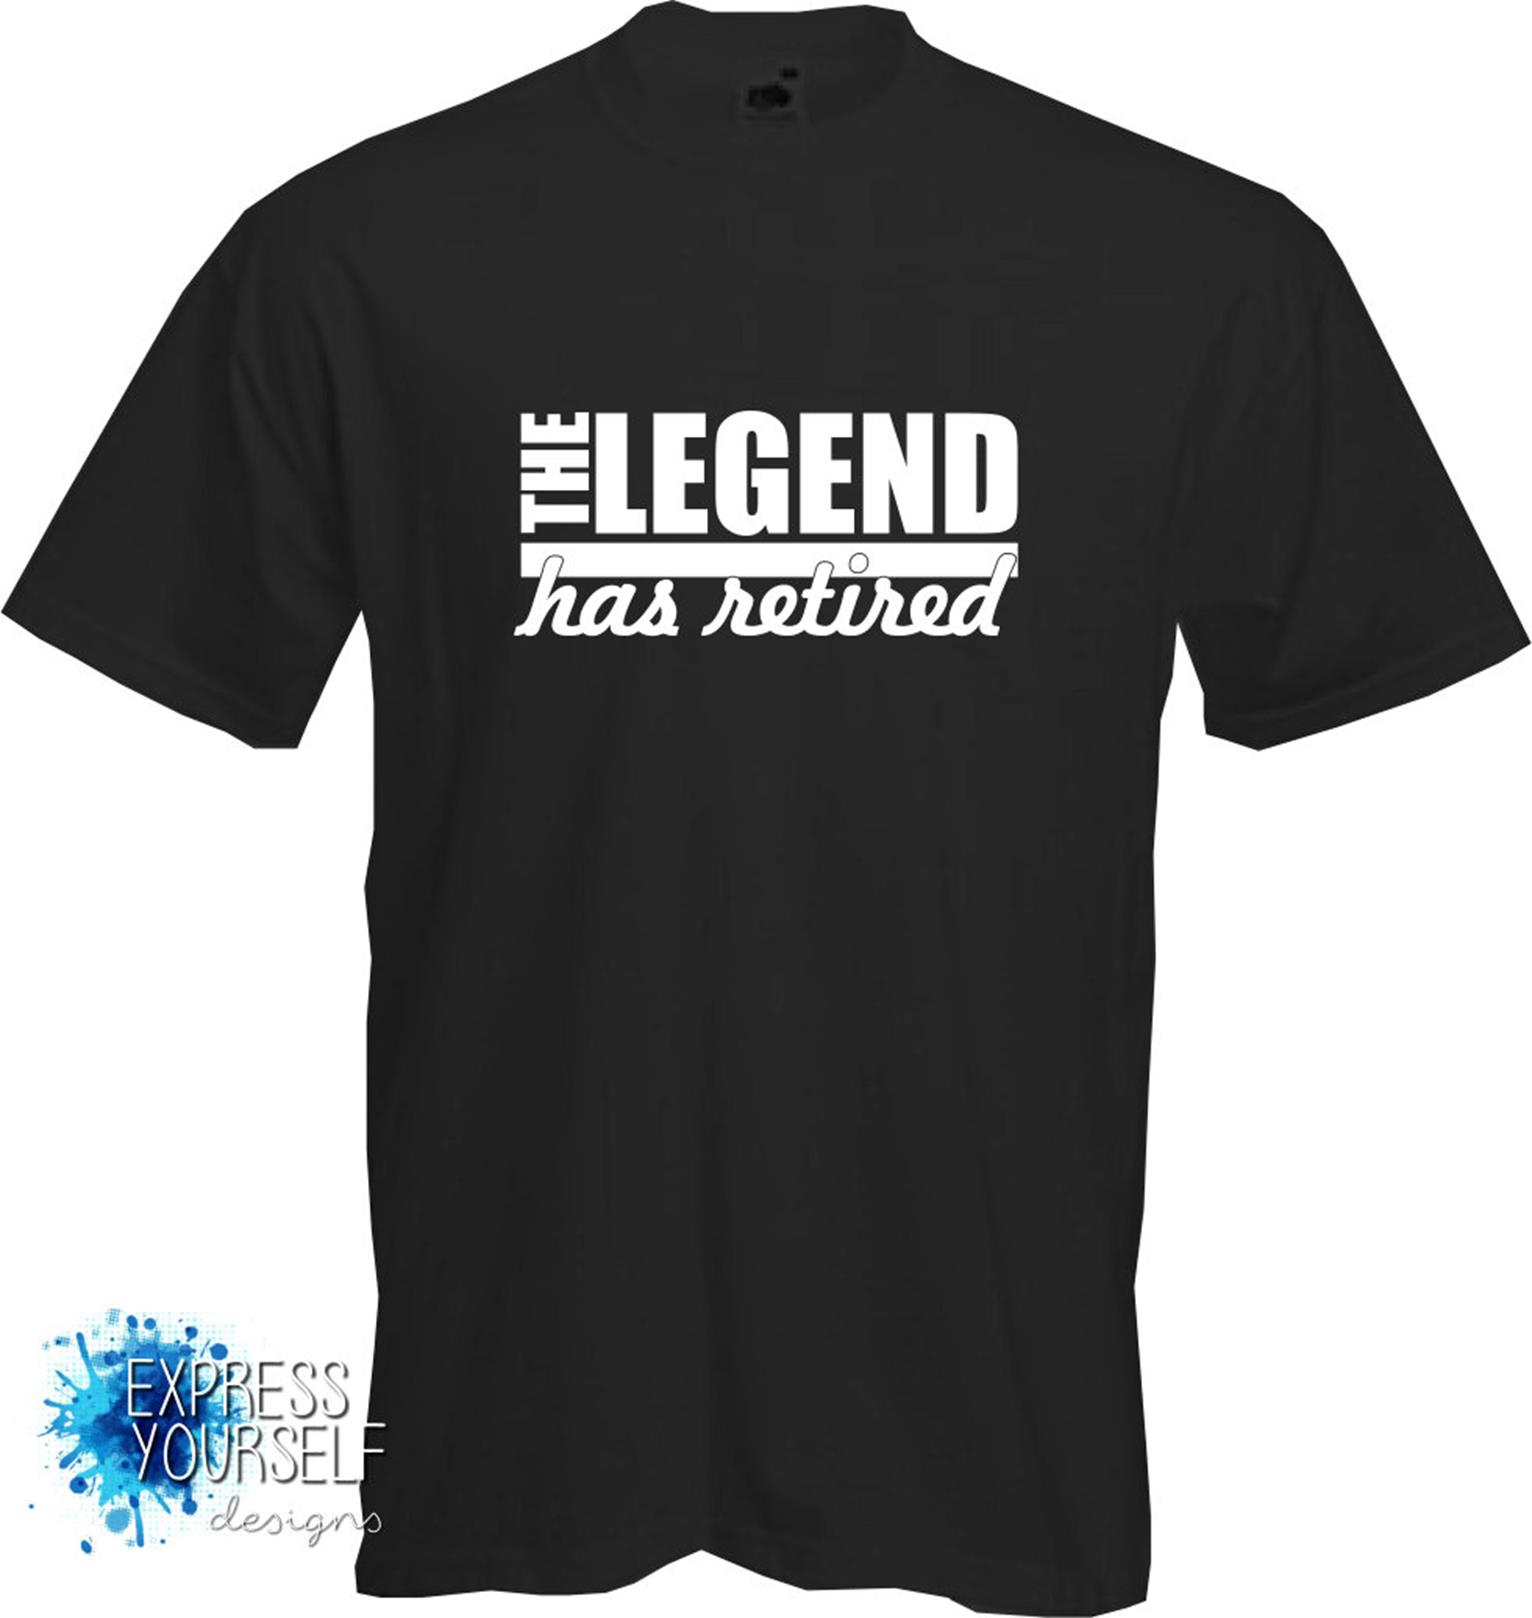 THE LEGEND HAS RETIRED - T Shirt, Retirement Present, Funny, Gift ...